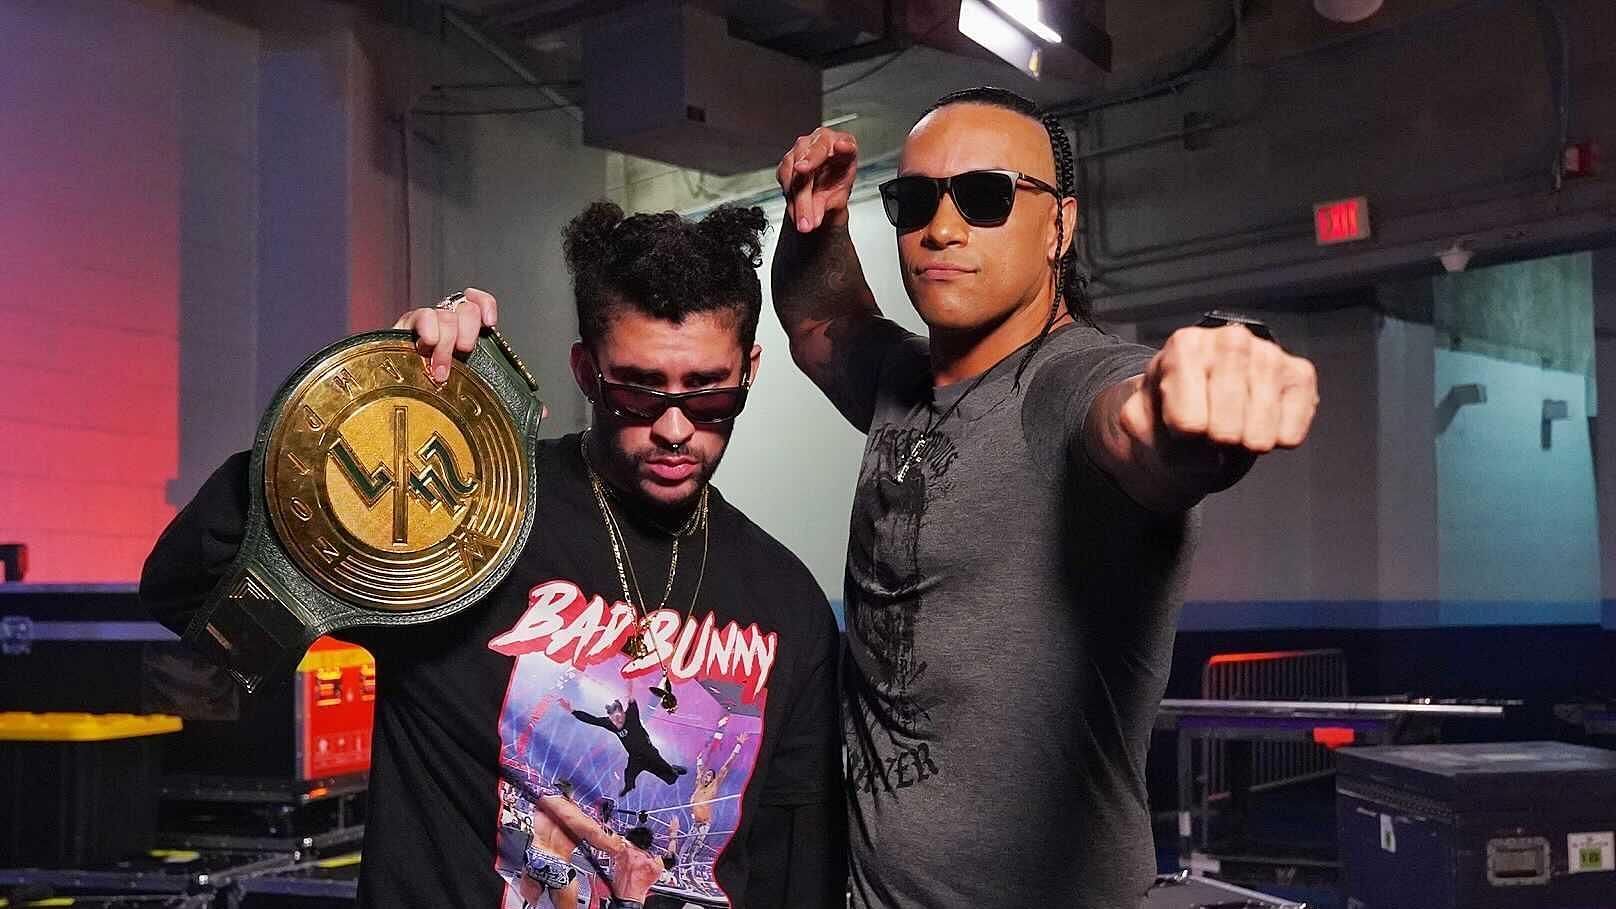 Damian Priest and Bad Bunny teamed up at WrestleMania 37.